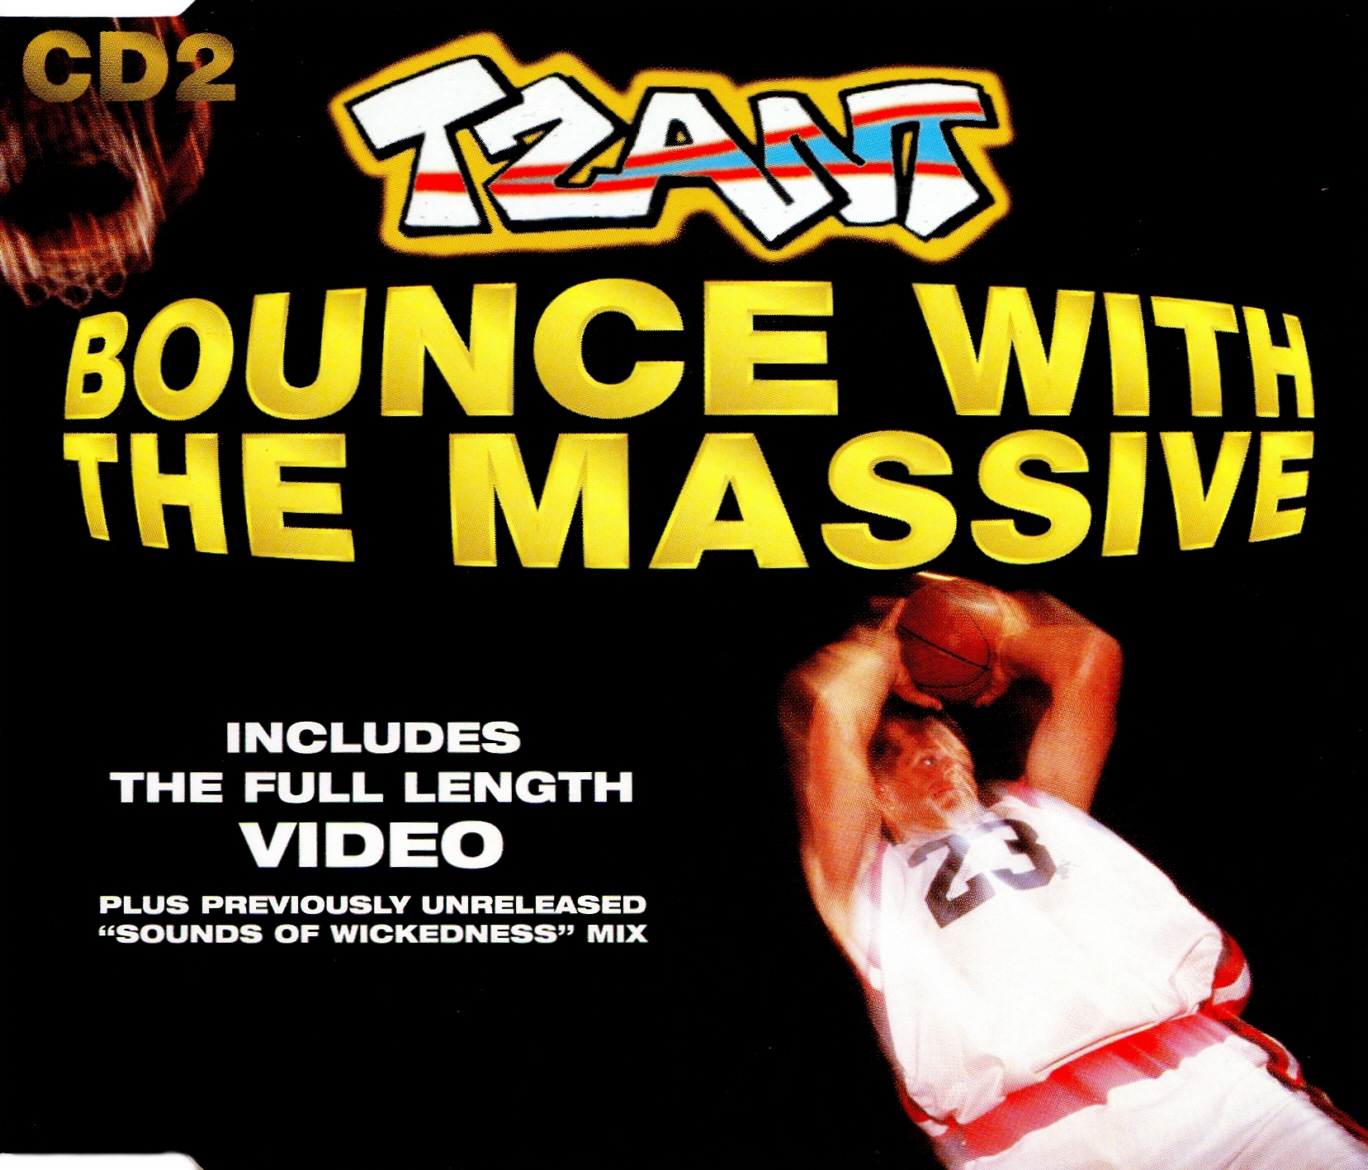 BOUNCE WITH THE MASSIVE cover art